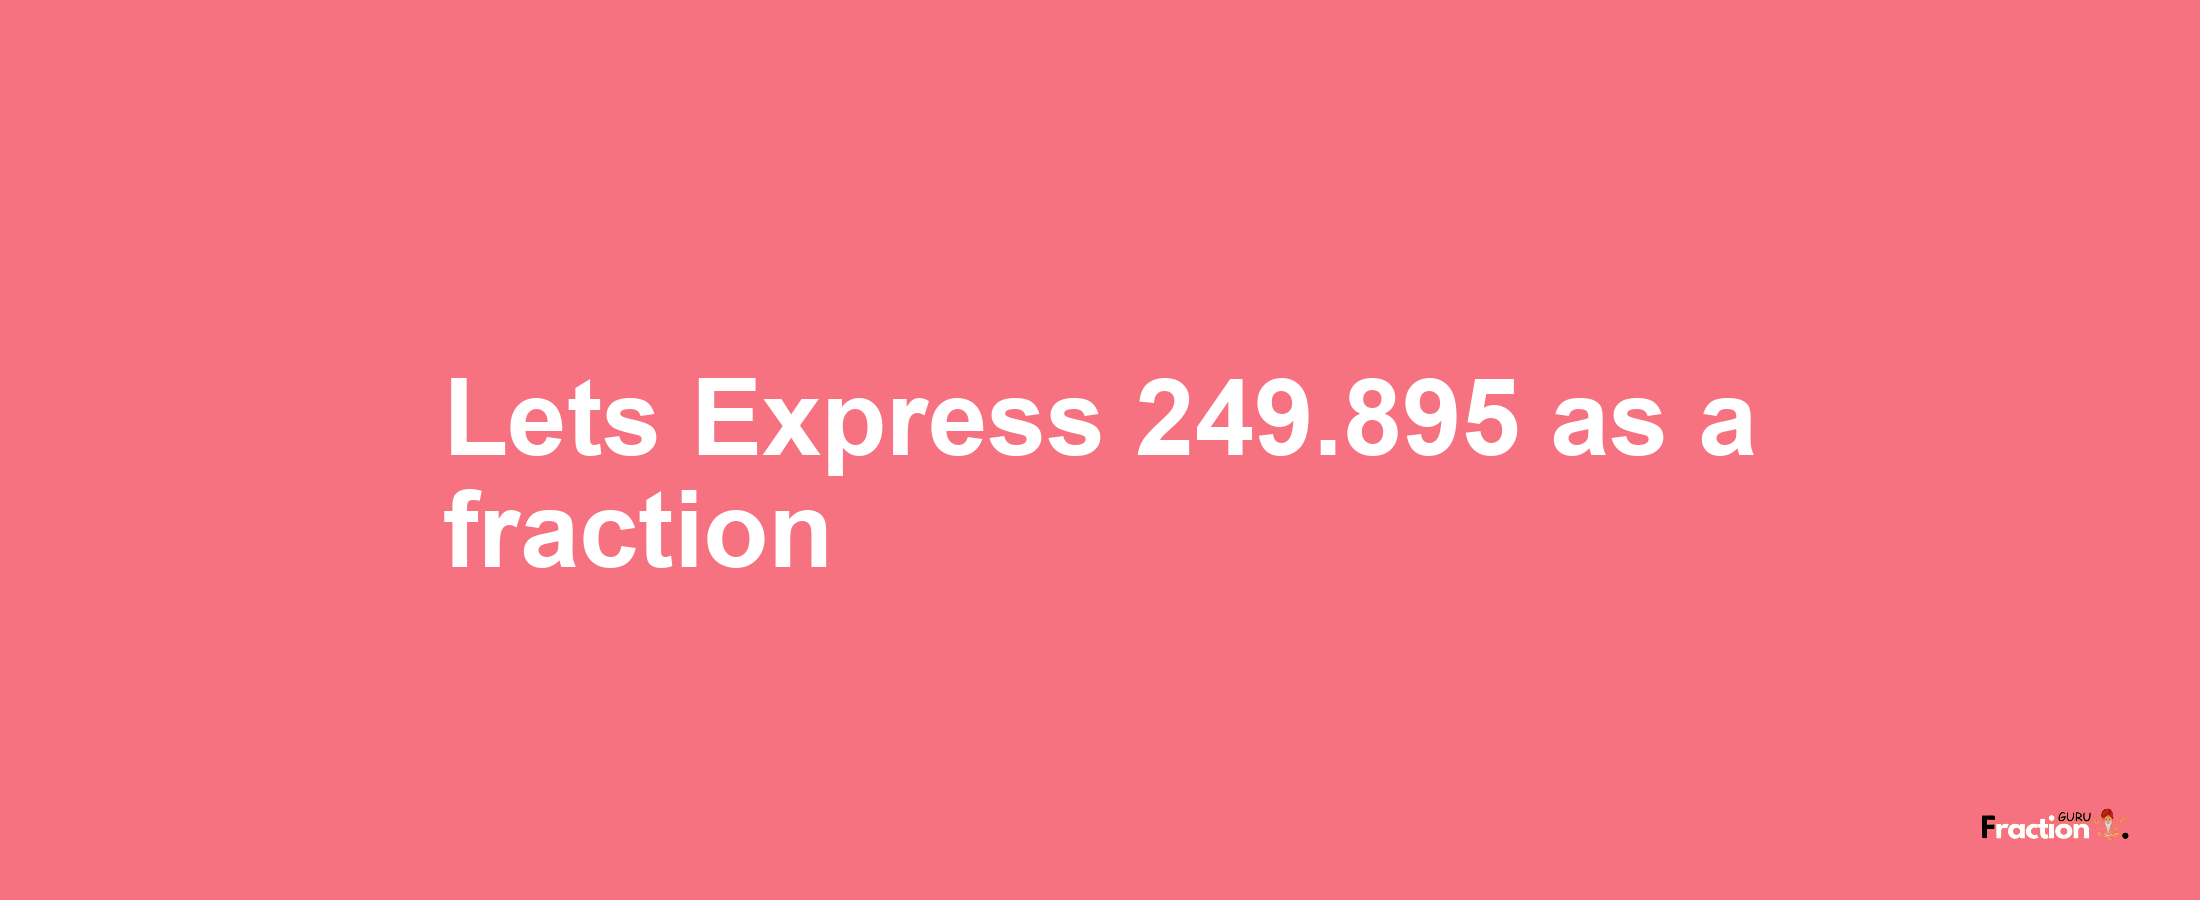 Lets Express 249.895 as afraction